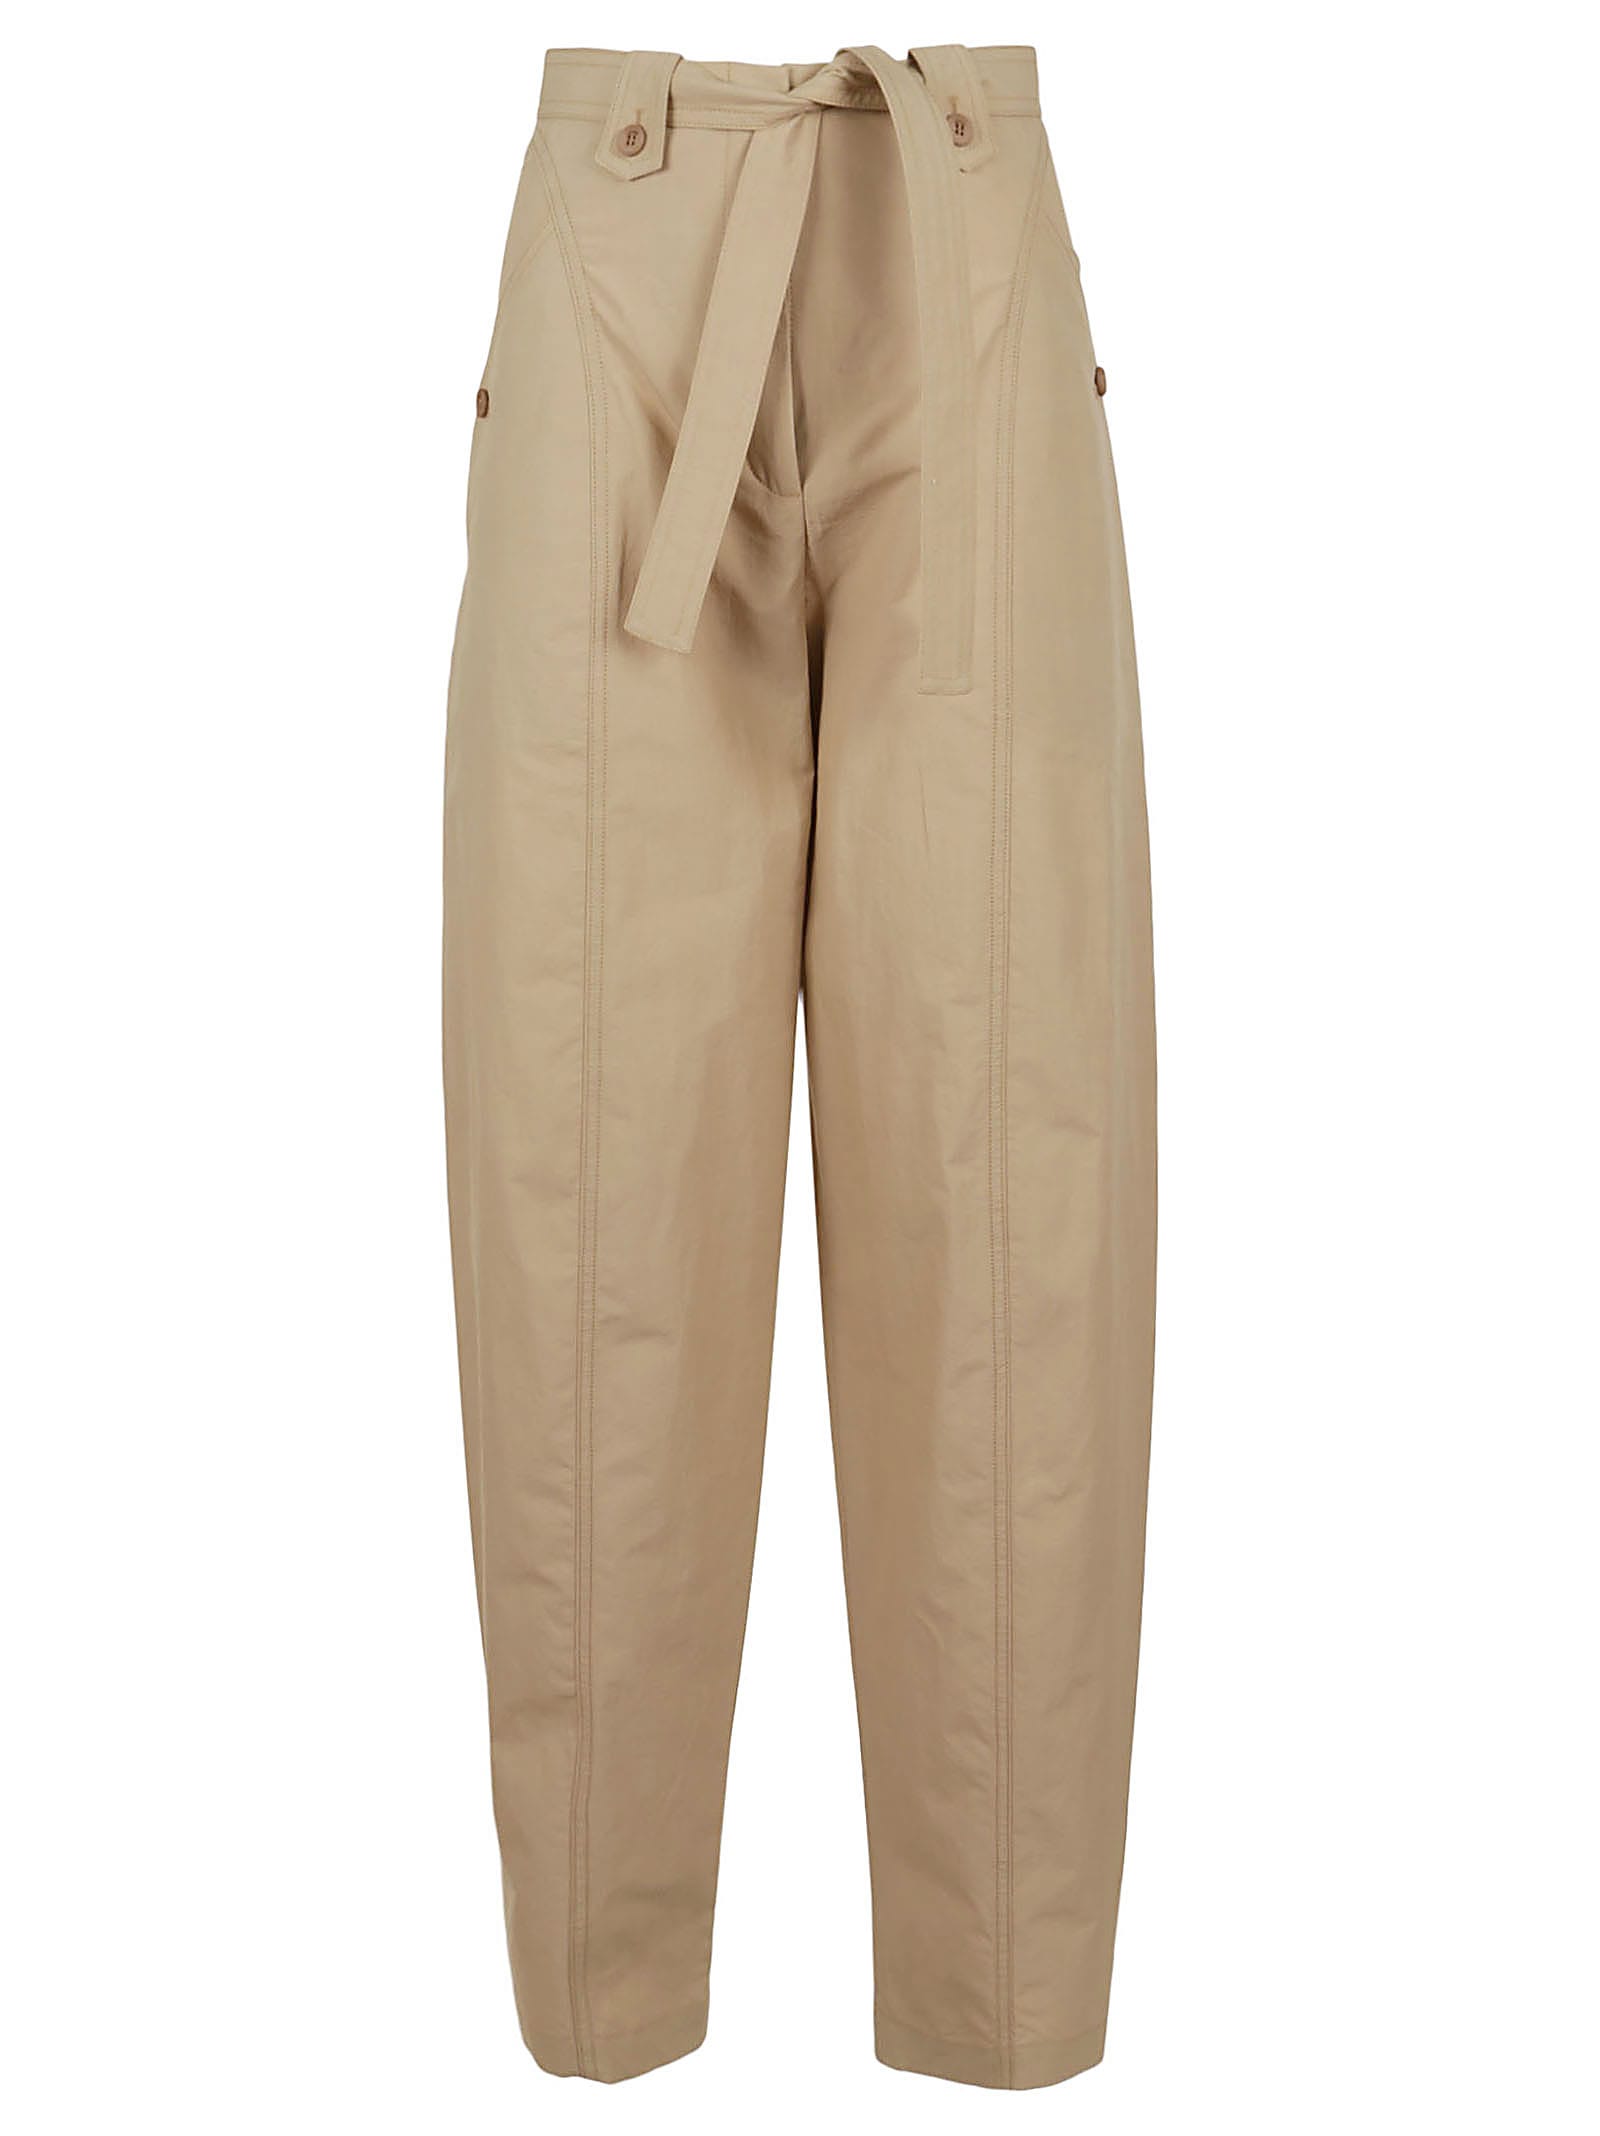 Kenzo Tapered Belted Pant